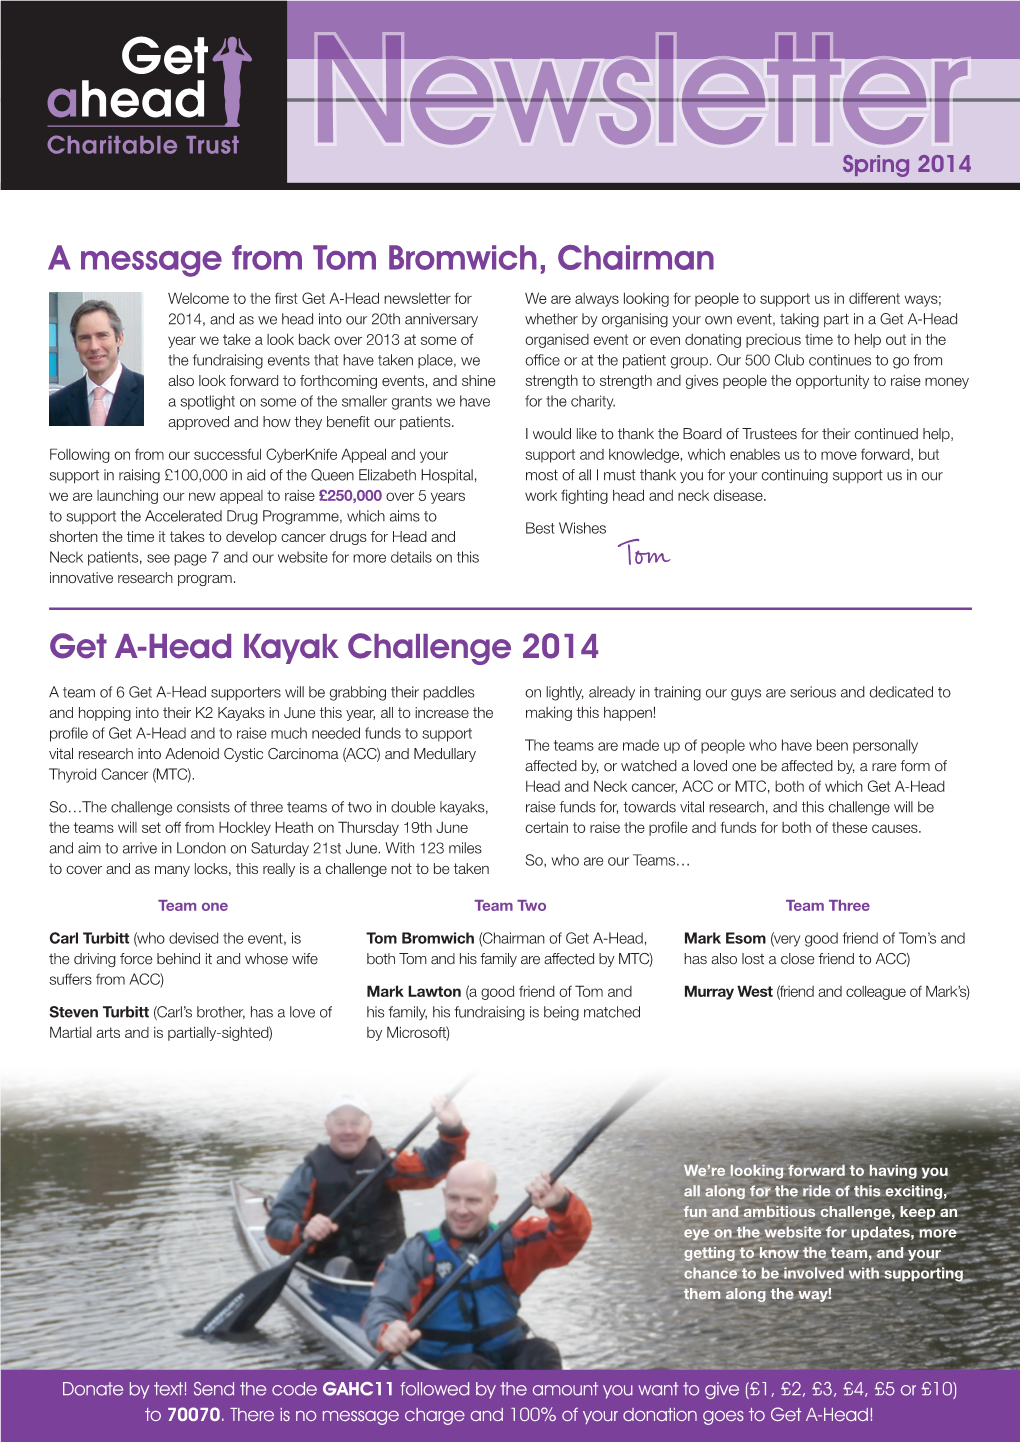 A Message from Tom Bromwich, Chairman Get A-Head Kayak Challenge 2014